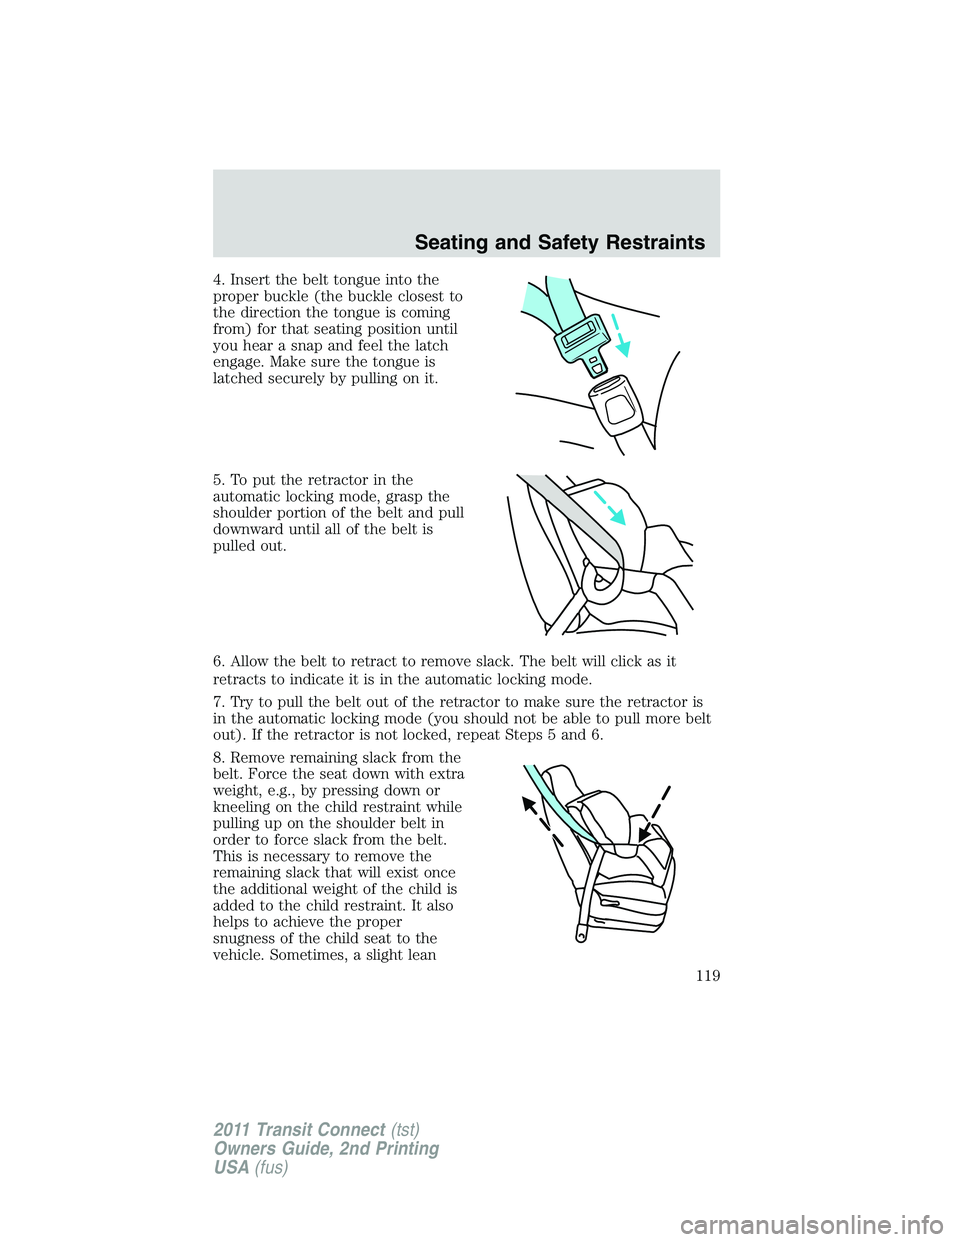 FORD TRANSIT 2011  Owners Manual 4. Insert the belt tongue into the
proper buckle (the buckle closest to
the direction the tongue is coming
from) for that seating position until
you hear a snap and feel the latch
engage. Make sure th